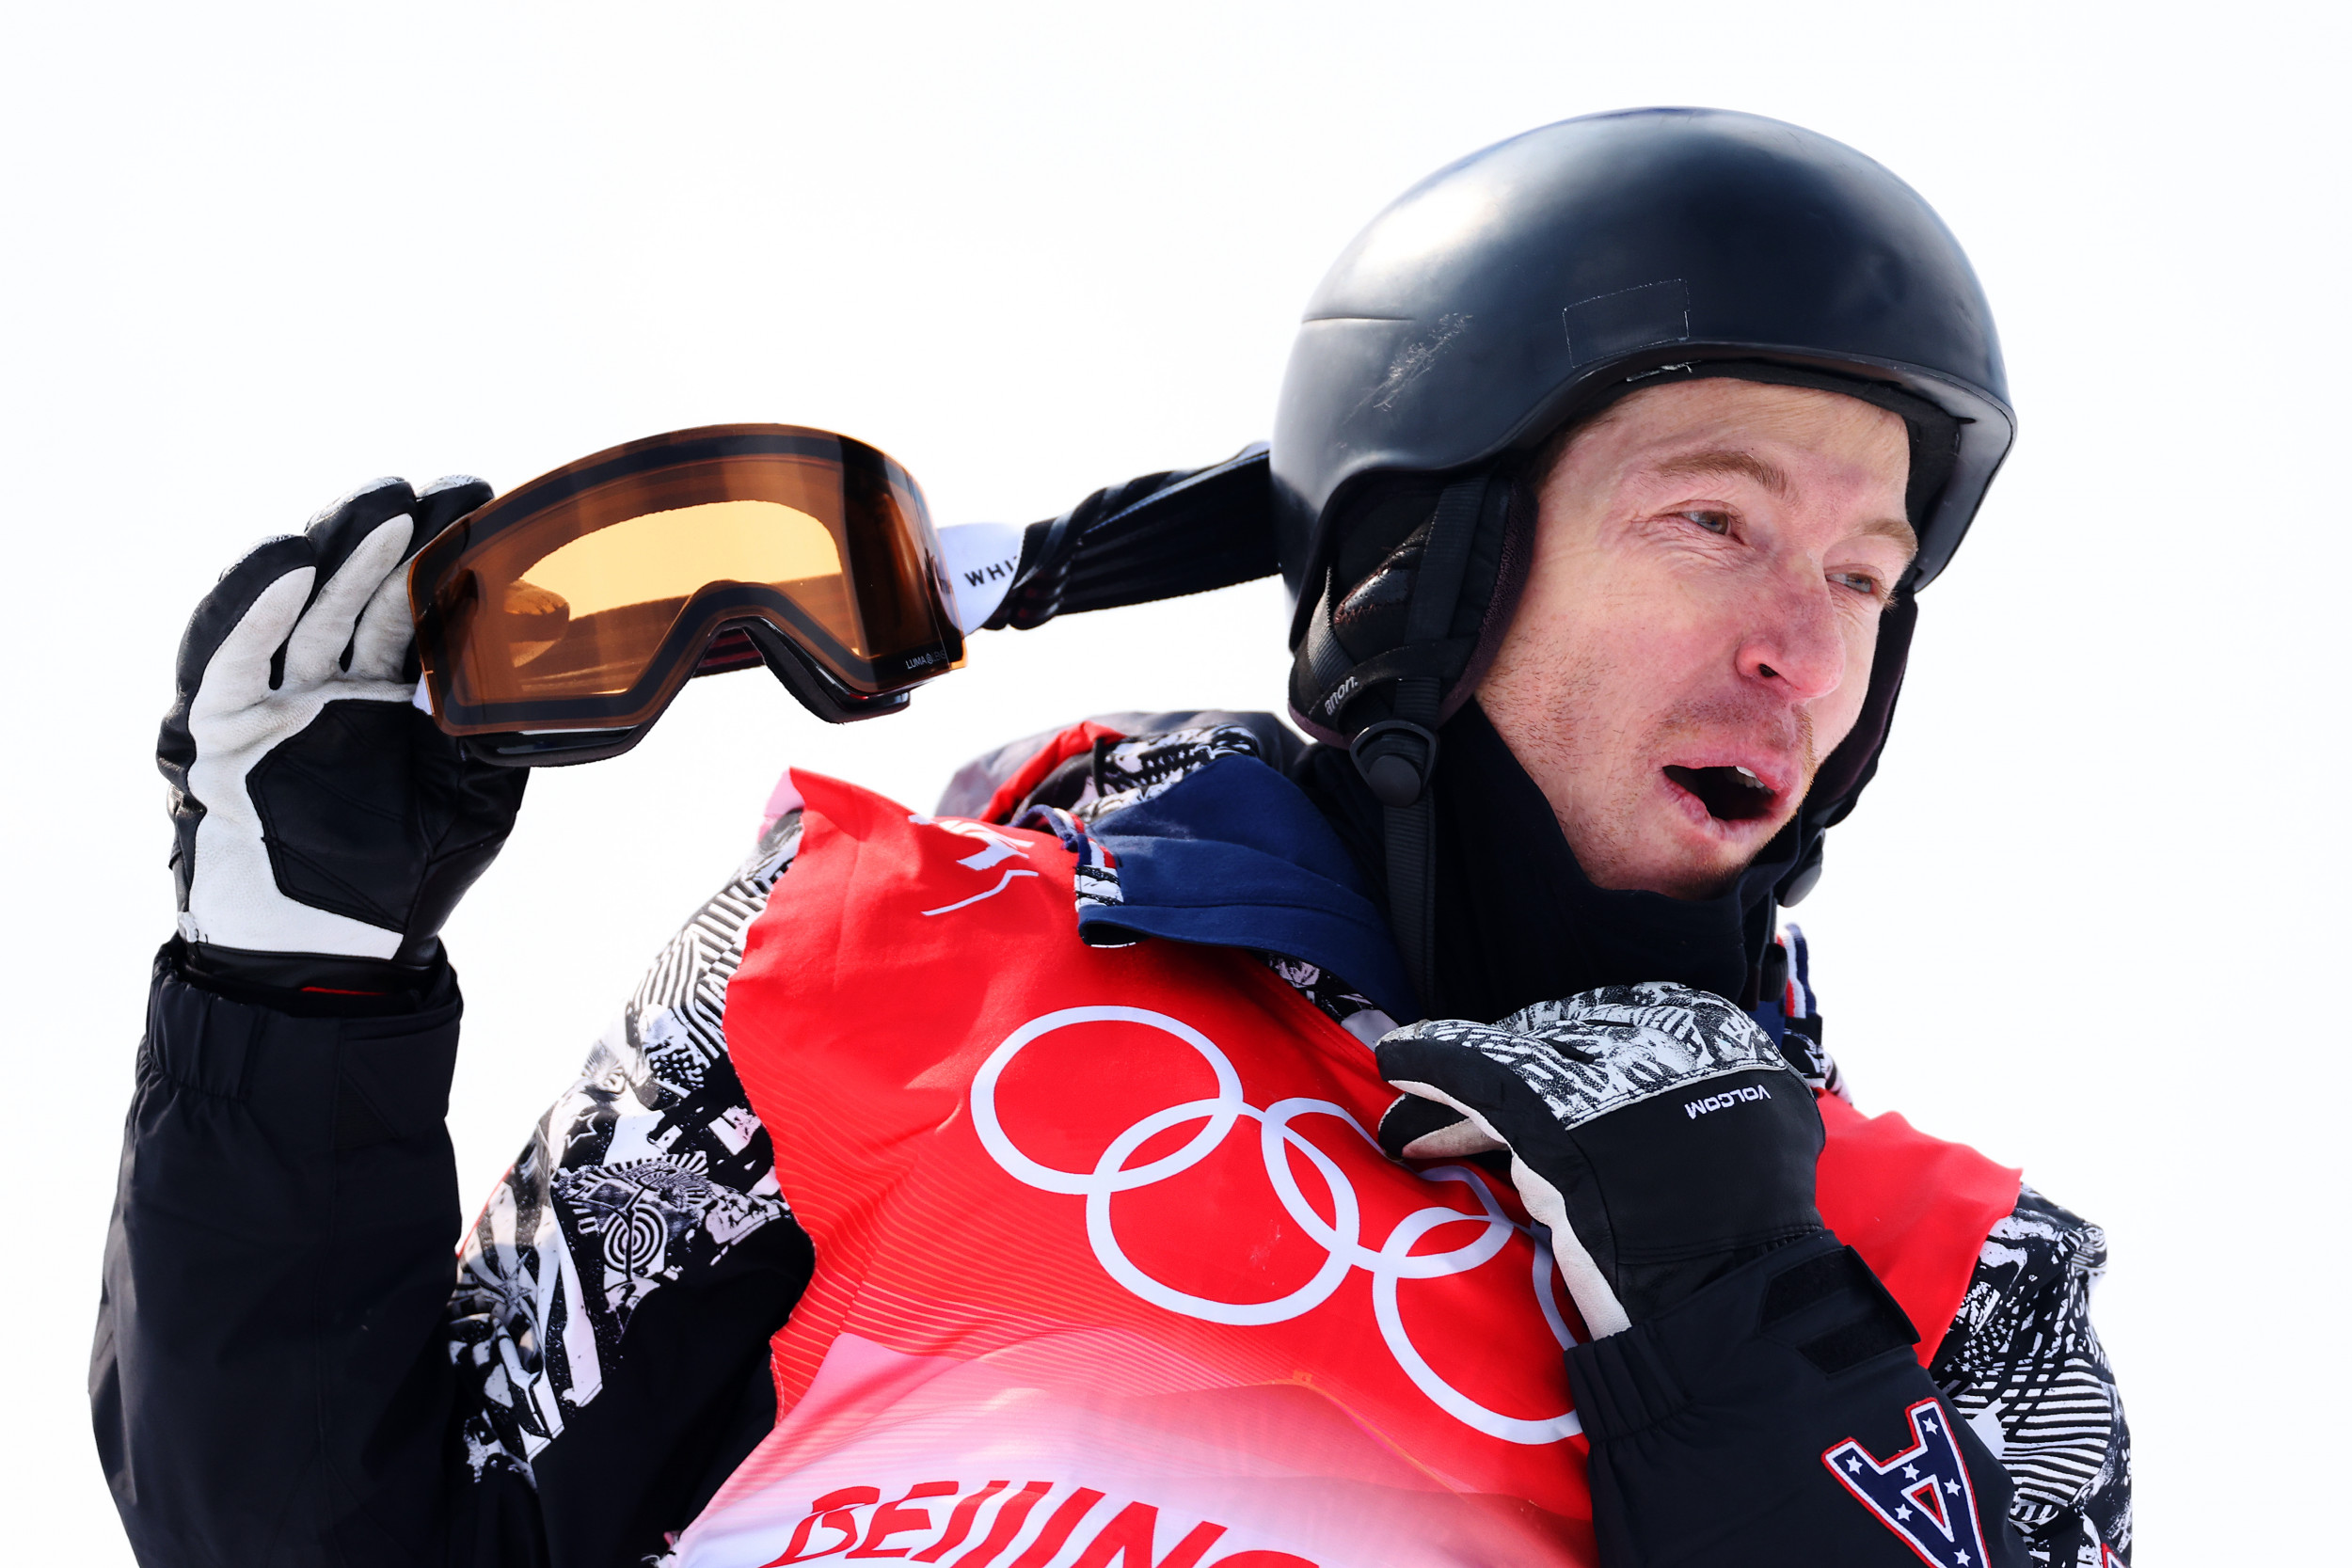 Shaun White upset in Olympic halfpipe qualifier after injuring